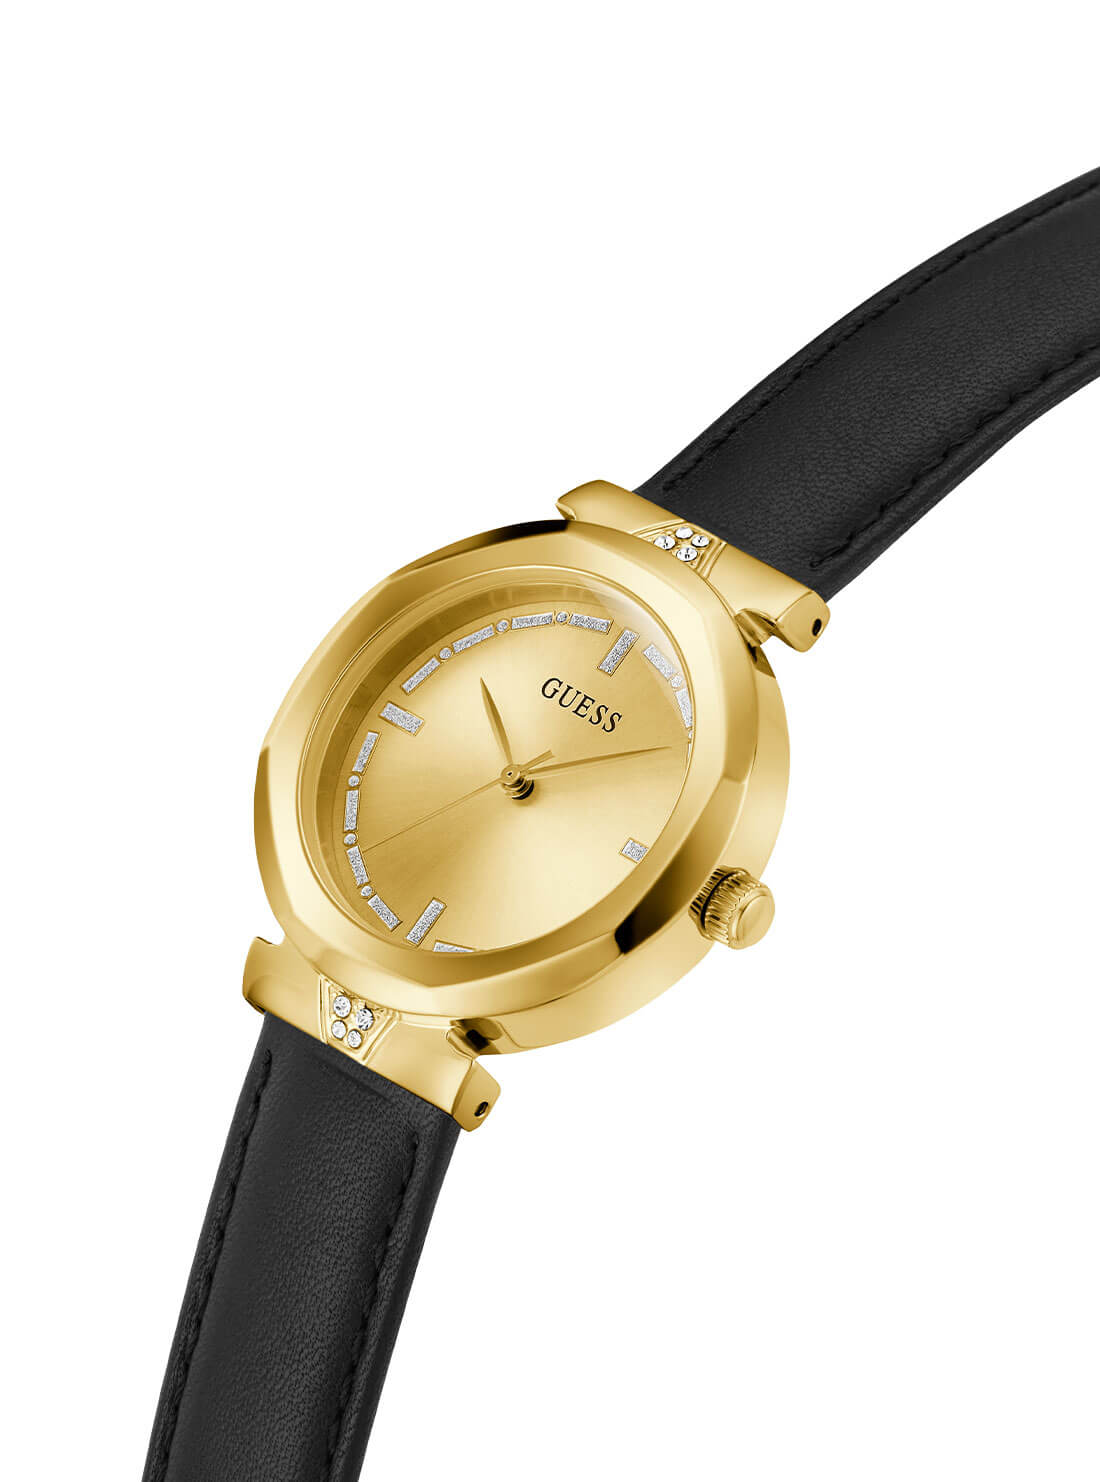 Gold Rumour Black Leather Watch | GUESS Women's Watches | detail view